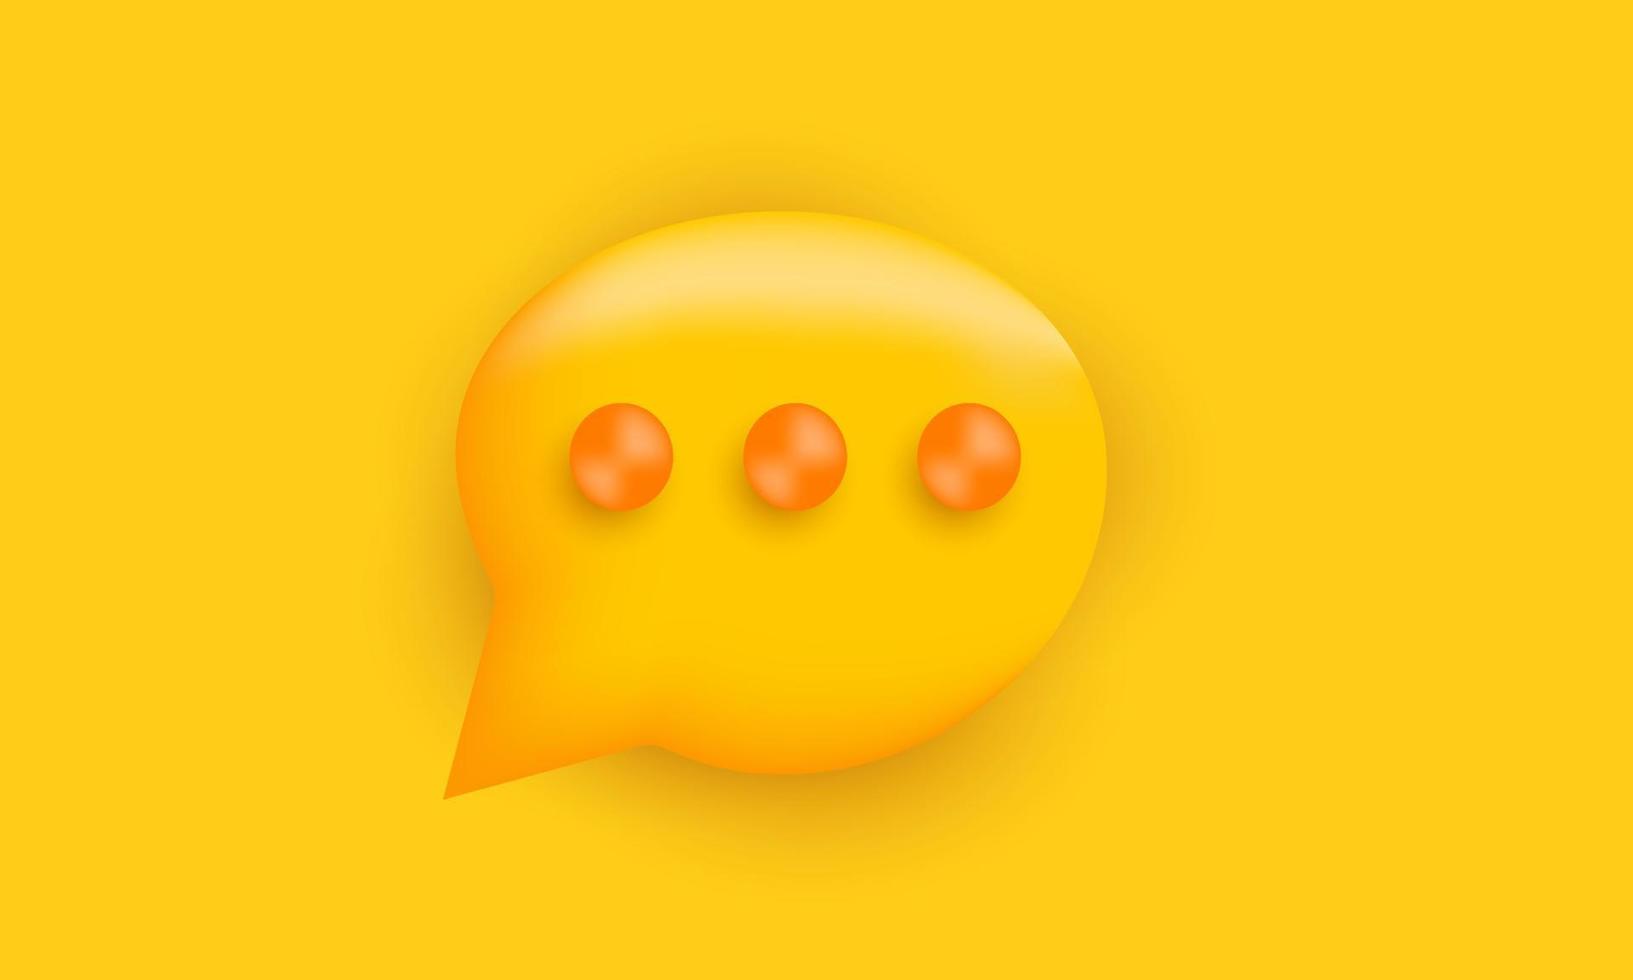 3d yellow glossy speech bubble illustration social on yellow background vector